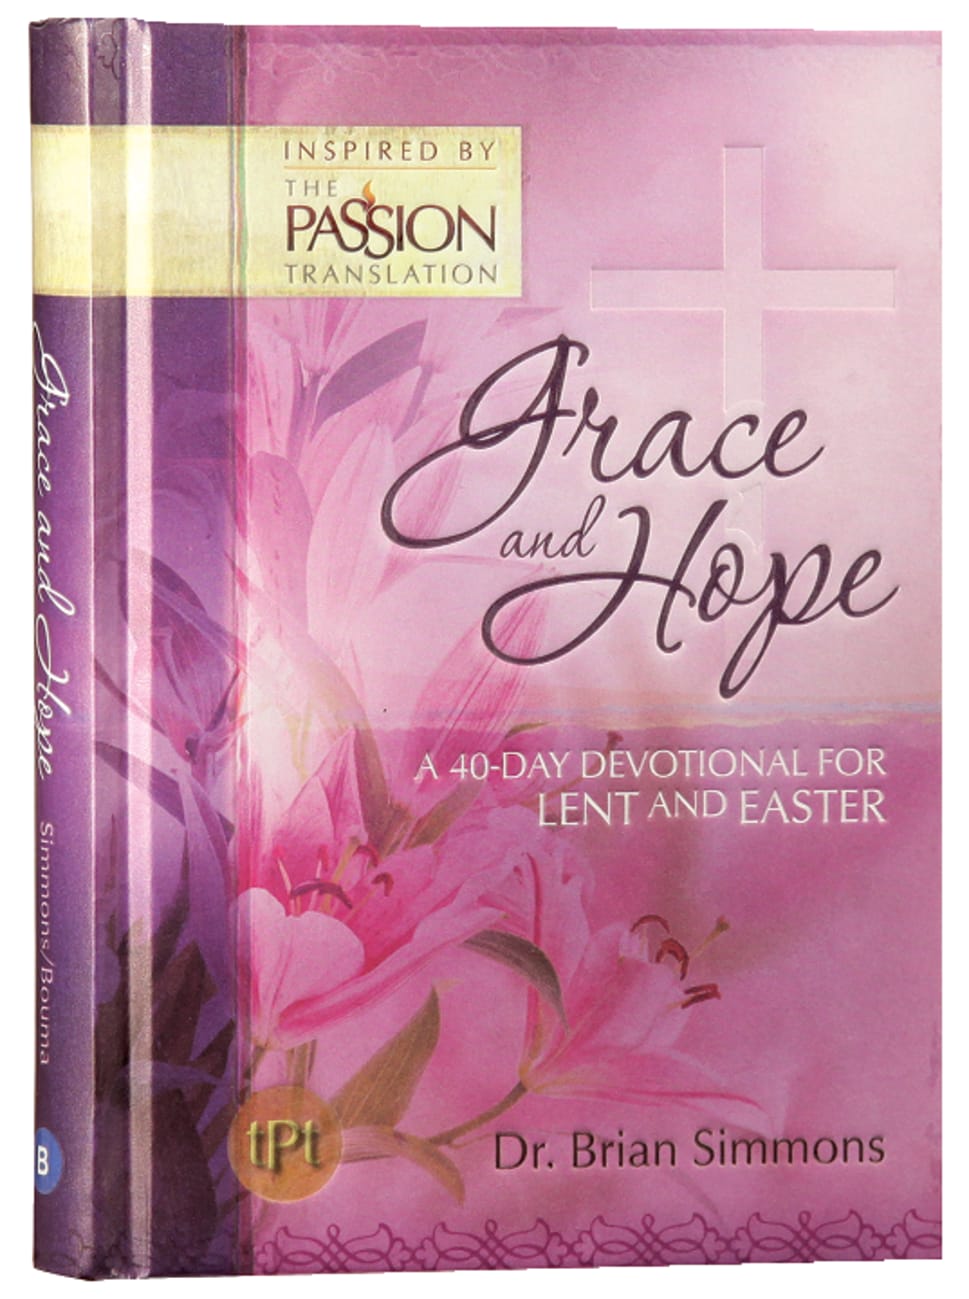 Grace & Hope: A 40 Day Devotional For Lent and Easter Inspired By the Passion Translation Hardback